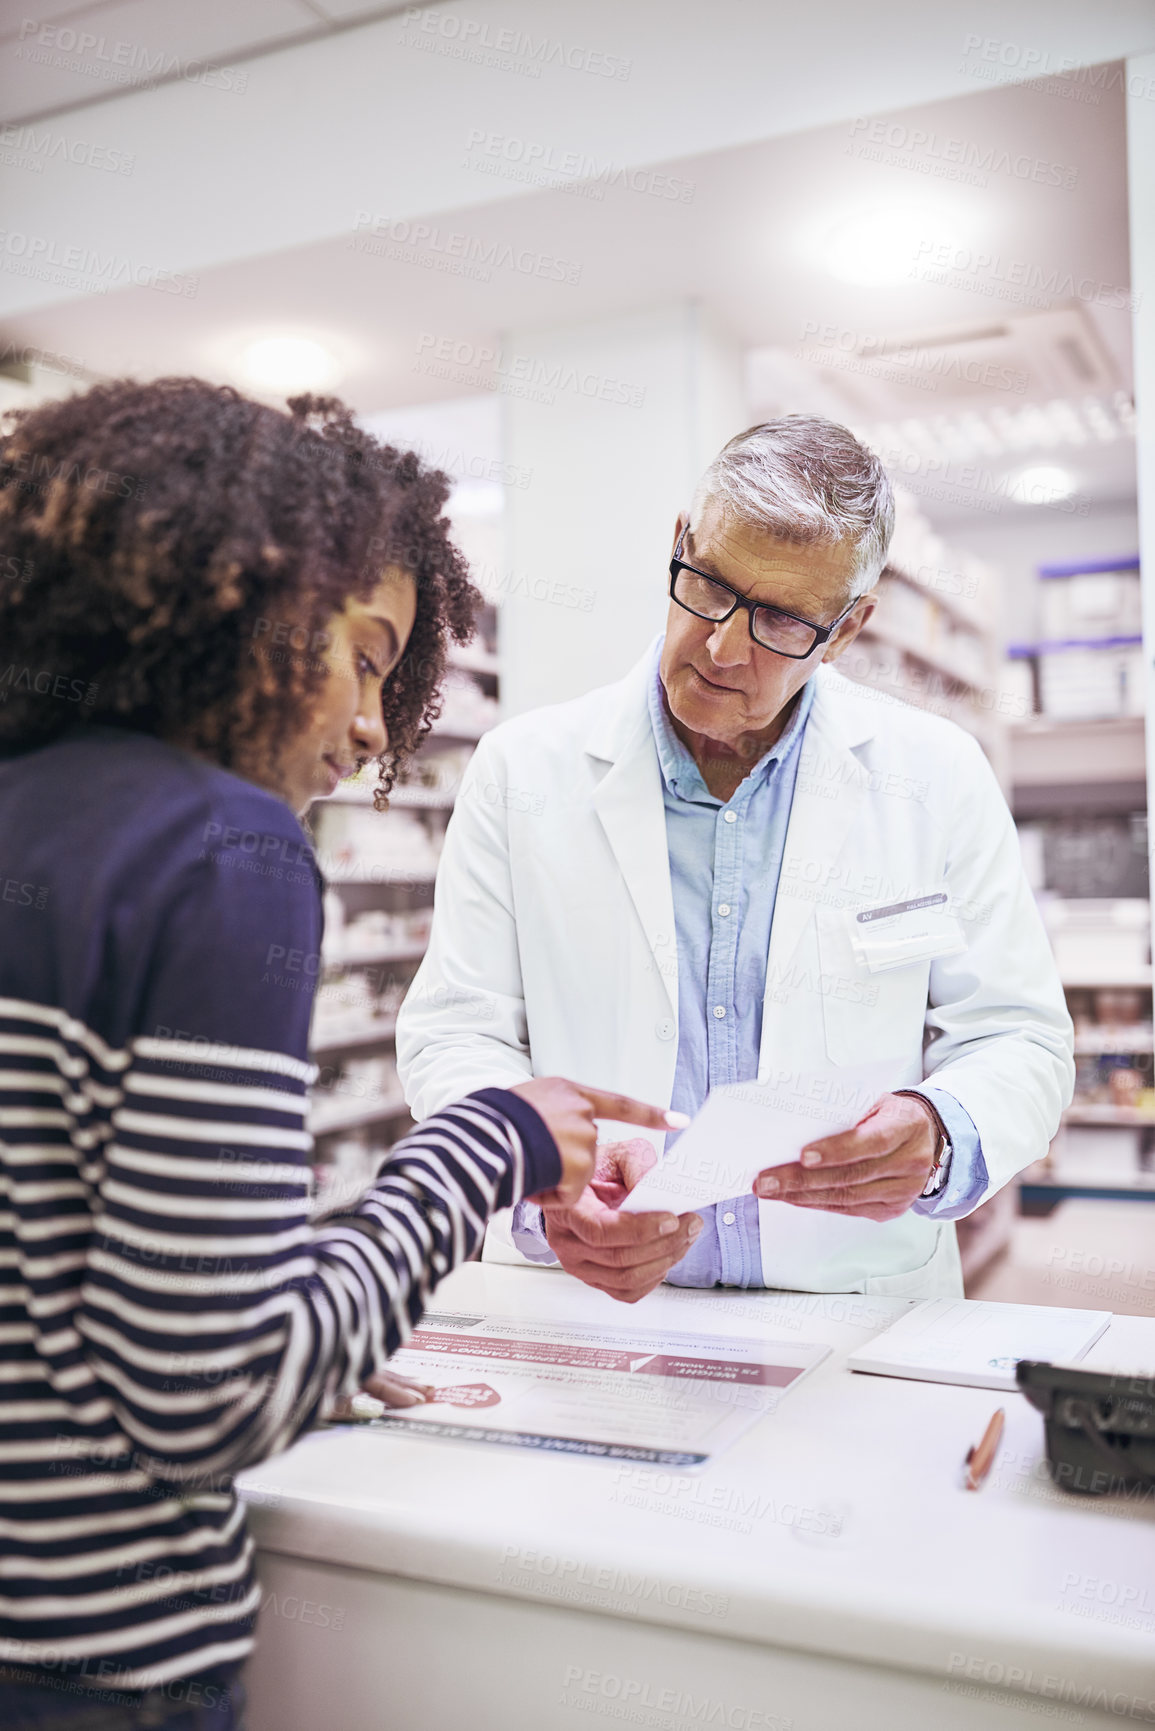 Buy stock photo Shot of a dedicated mature male pharmacist giving a customer prescription meds over the counter